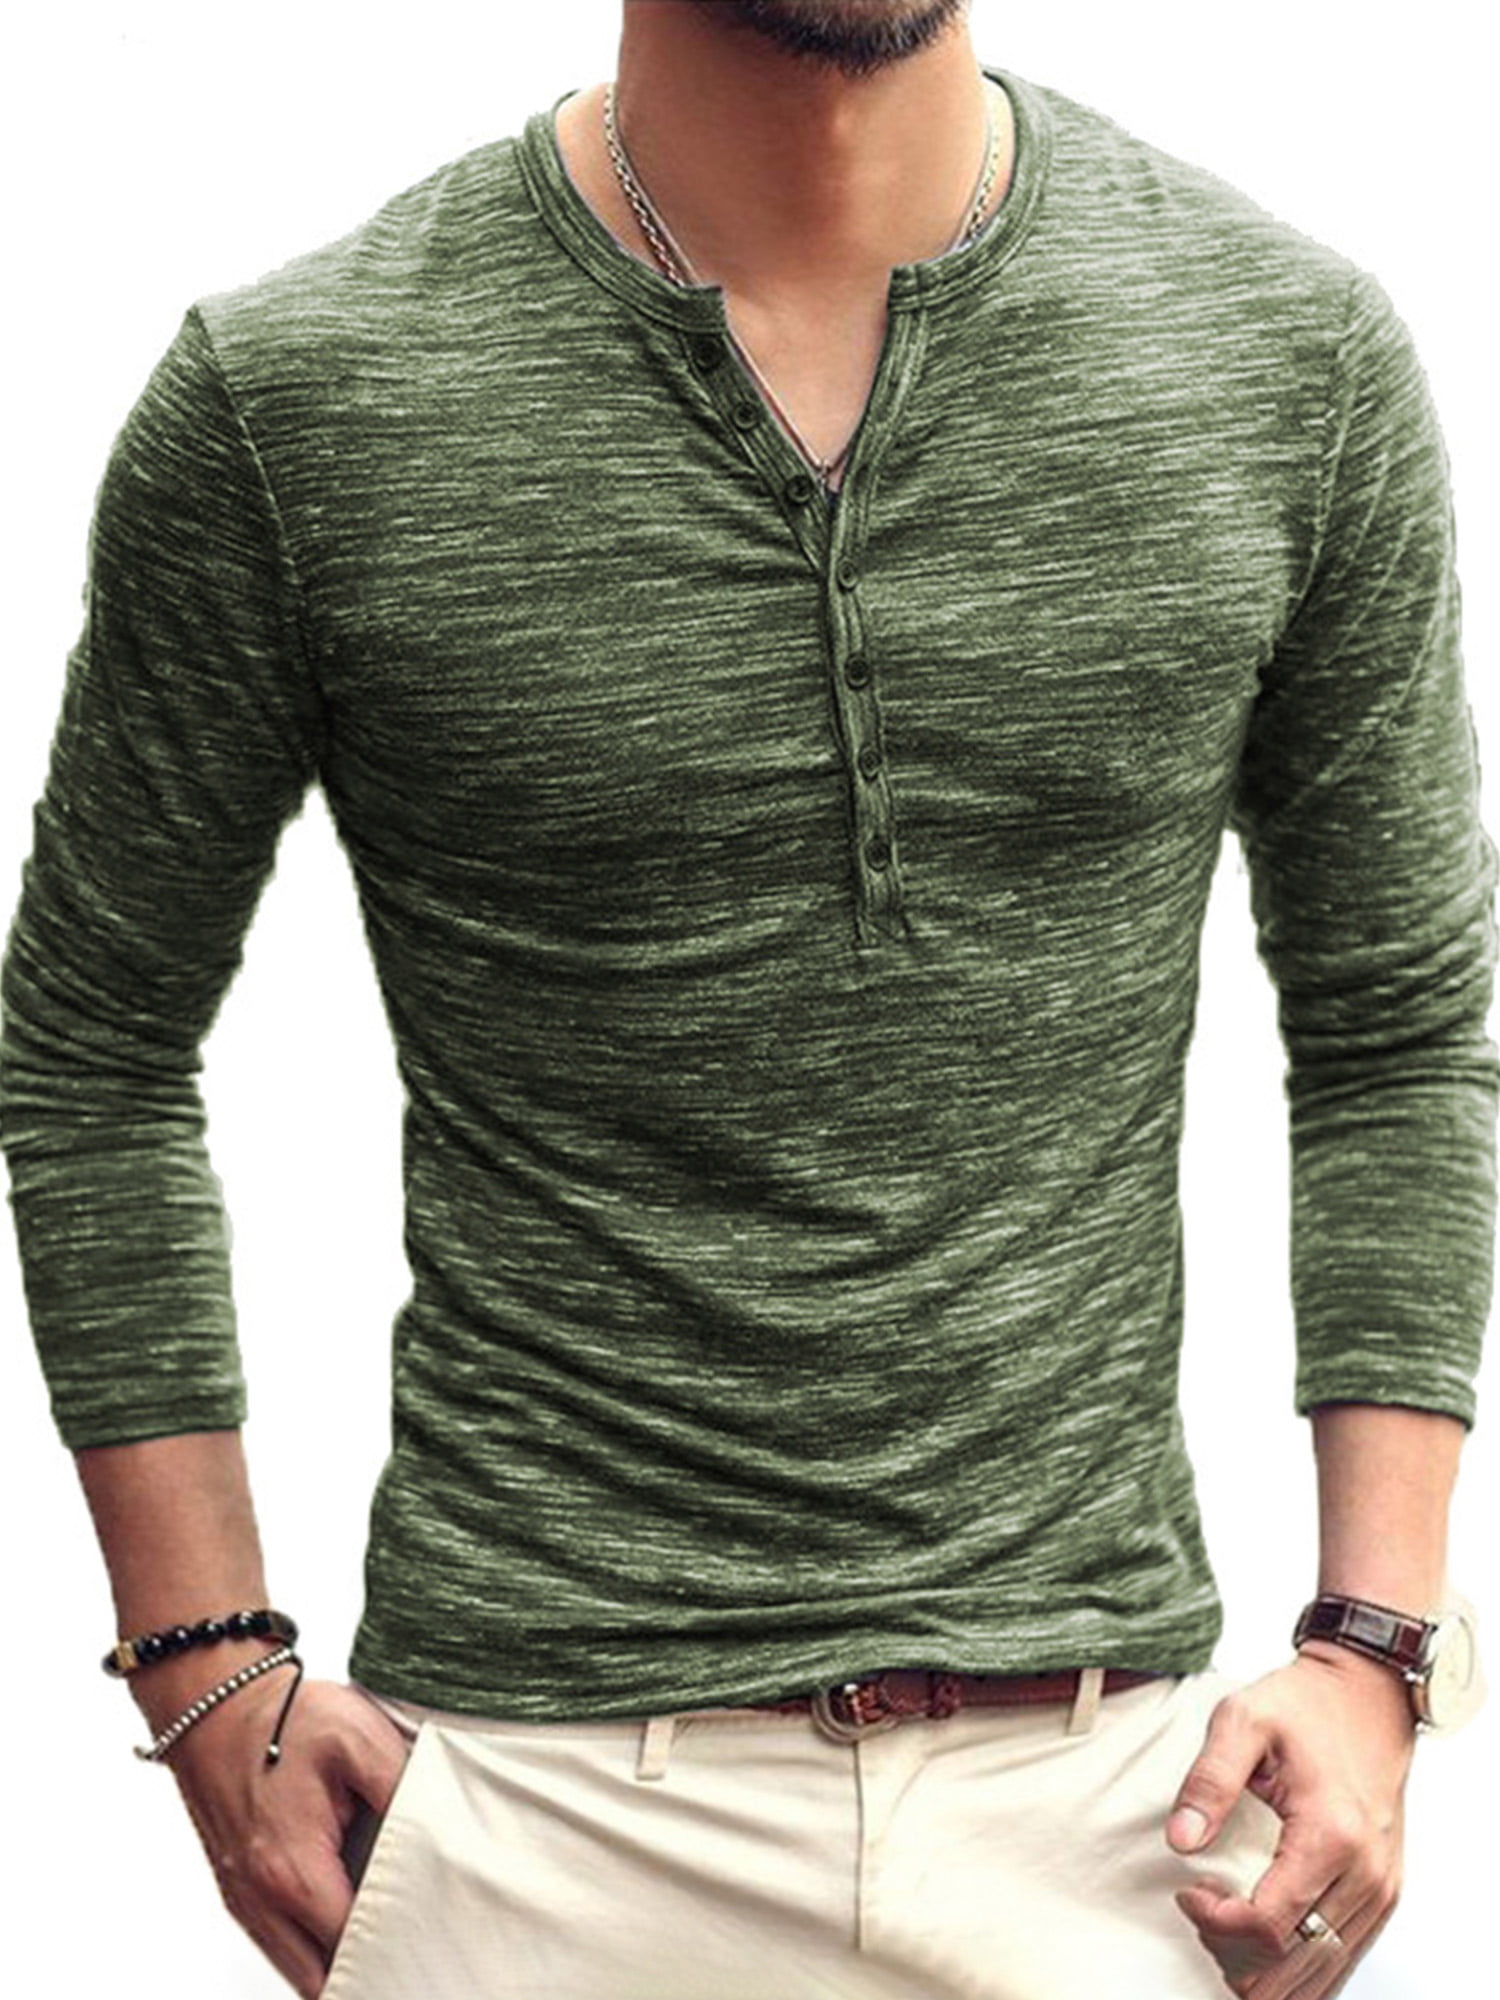 Allonly Mens Simple Round Neck Button Closure Sweatshirt Solid Color Long Sleeve Tshirt 